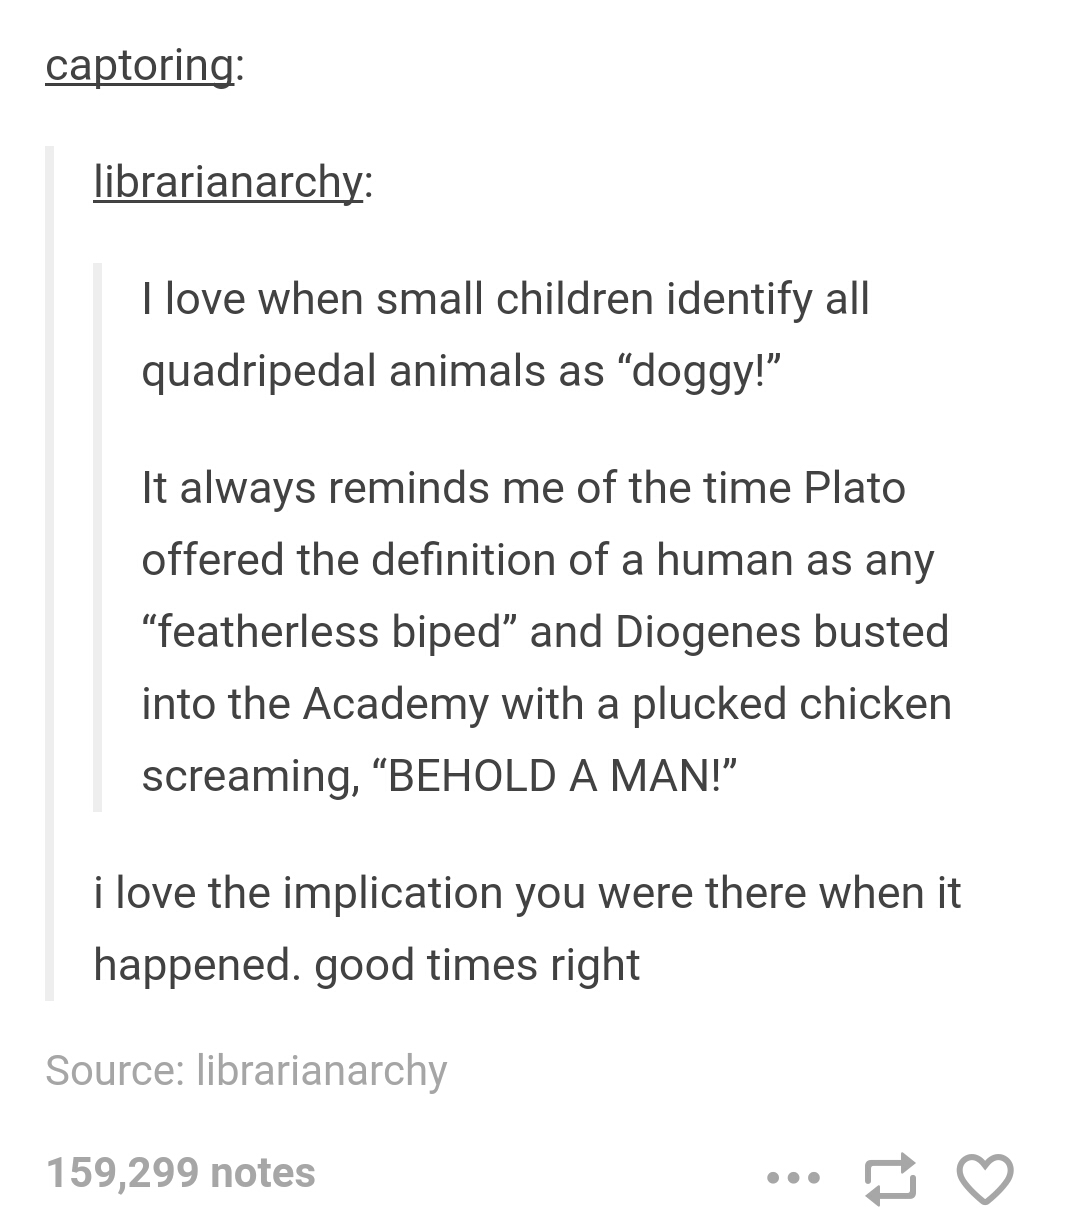 tumblr - diogenes - captoring librarianarchy I love when small children identify all quadripedal animals as doggy! It always reminds me of the time Plato offered the definition of a human as any "featherless biped and Diogenes busted into the Academy with